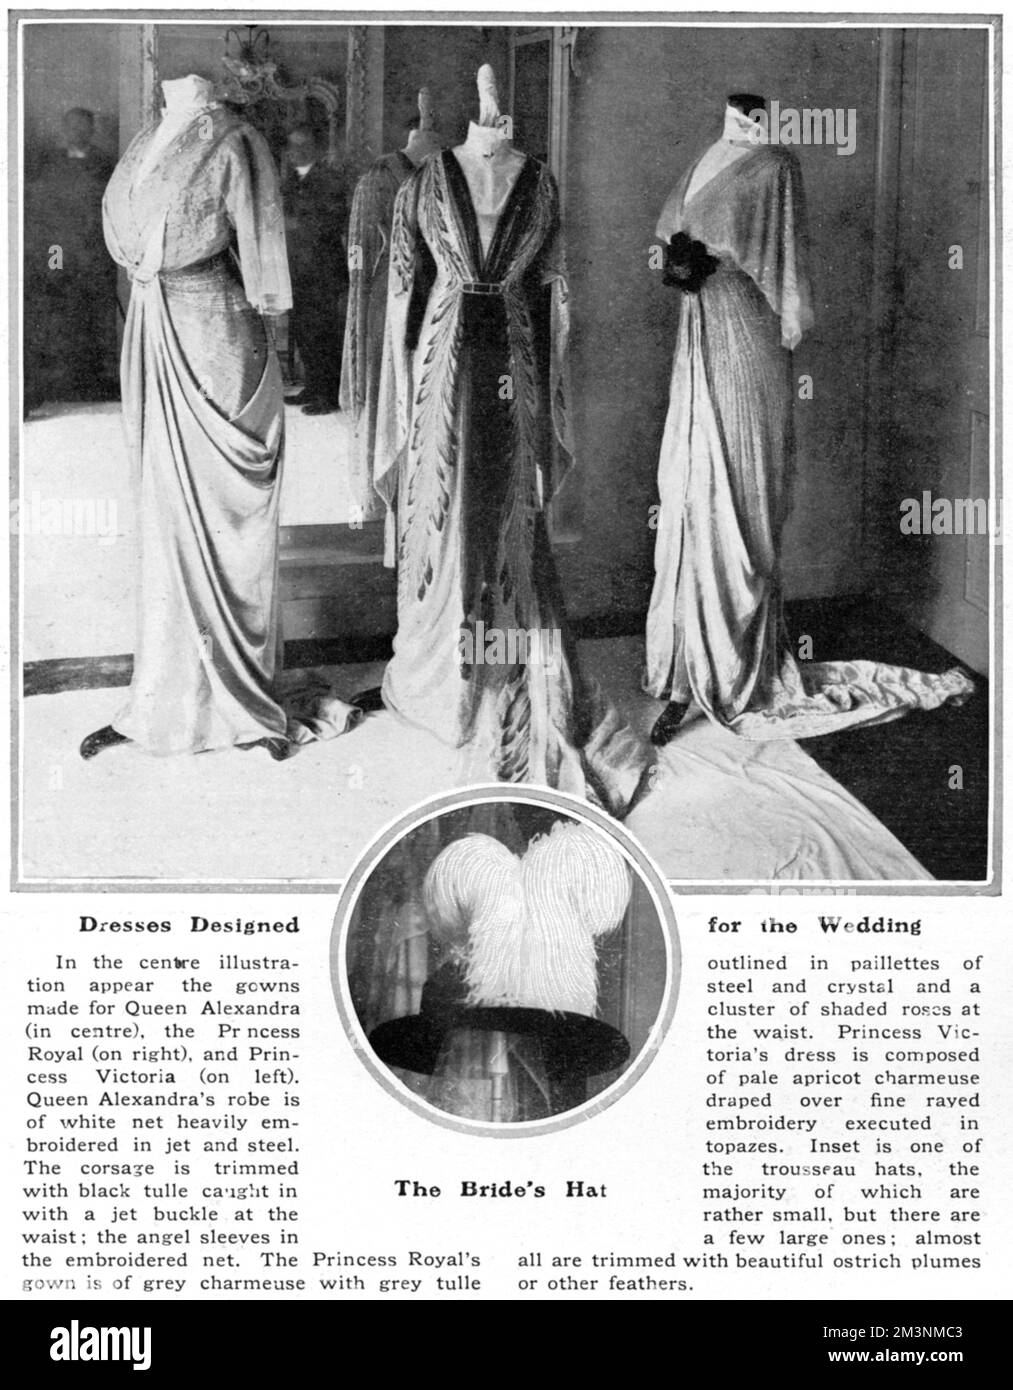 Three dresses designed for royal guests to wear to the wedding of Princess Alexandra, Duchess of Fife to Prince Arthur of Connaught.  In the centre is the dress designed for Queen Alexandra of white net heavily embroidered in jet and steel.  The corsage is trimmed with black tulle caught with a jet buckle at the waist, while the angel sleeves are of embroidered net.  The dress on the right is for the Princess Royal, the bride's mother (Princess Louise, eldest daughter of Edward VII) and of grey charmeuse with grey tulle outlined in pailettes of steel and crystal with a cluster of shaded roses Stock Photo